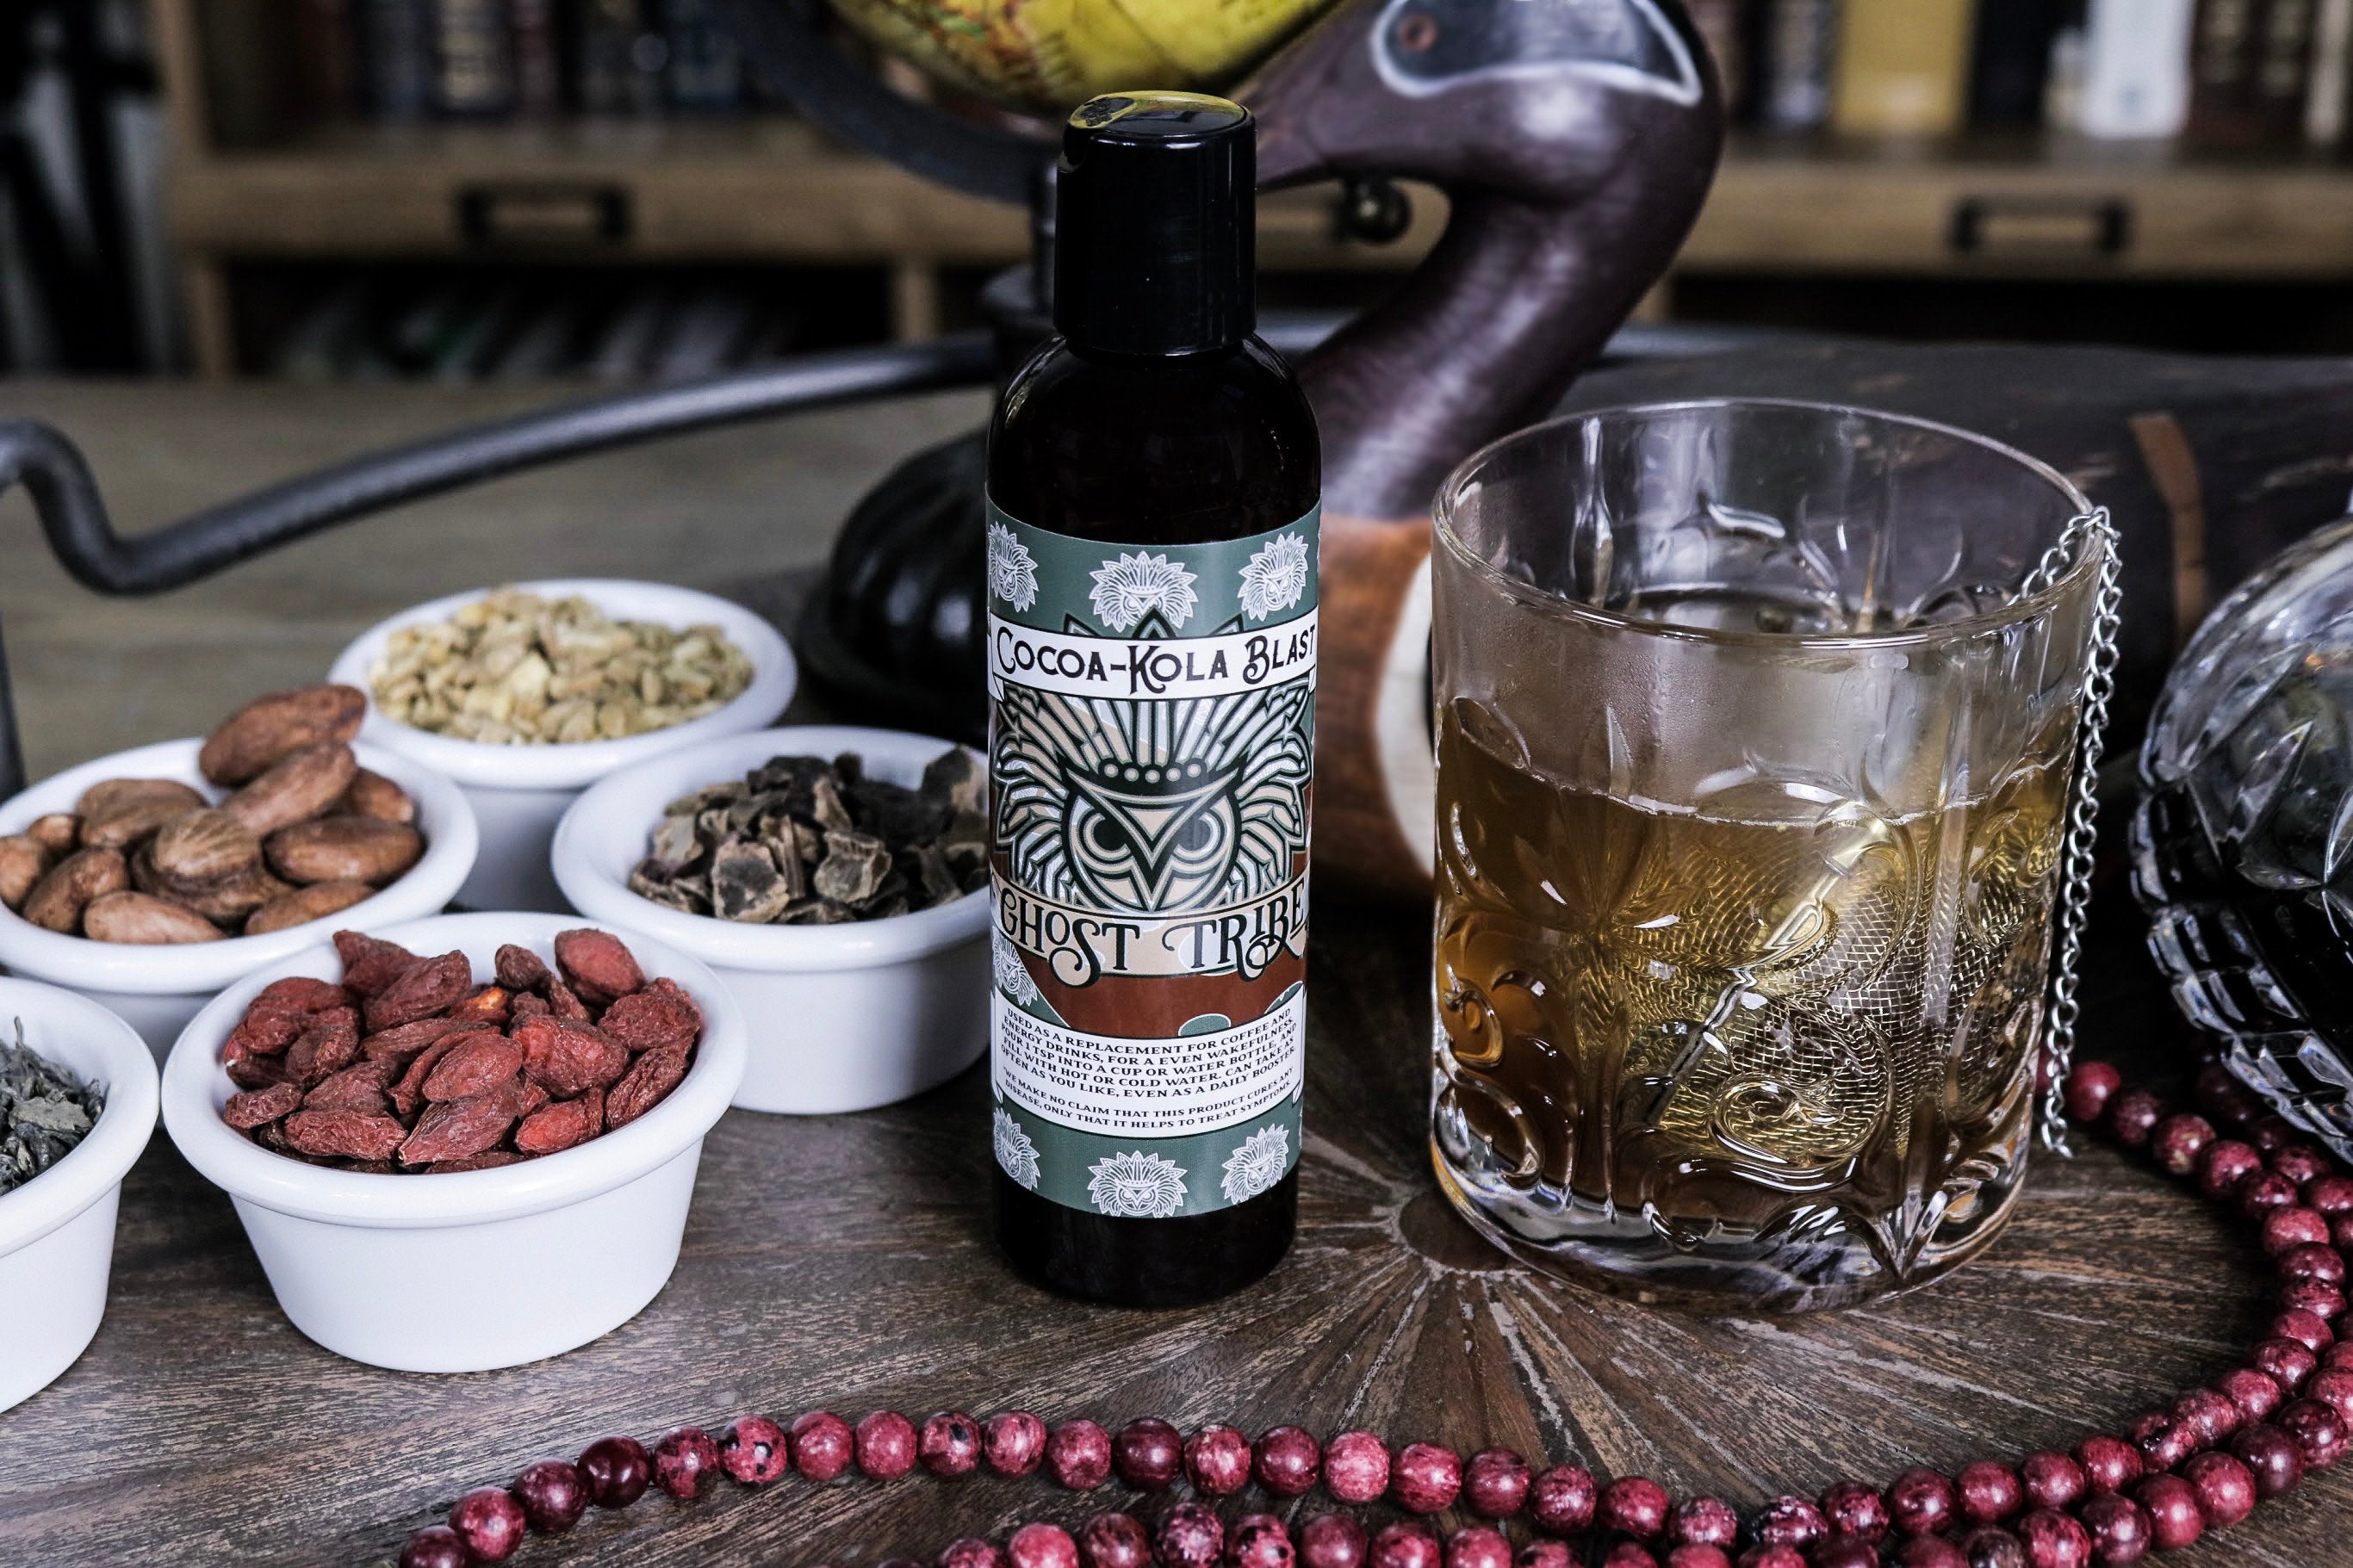 Ghost Tribe - Night Owl Traditional Cured Tea Supplement